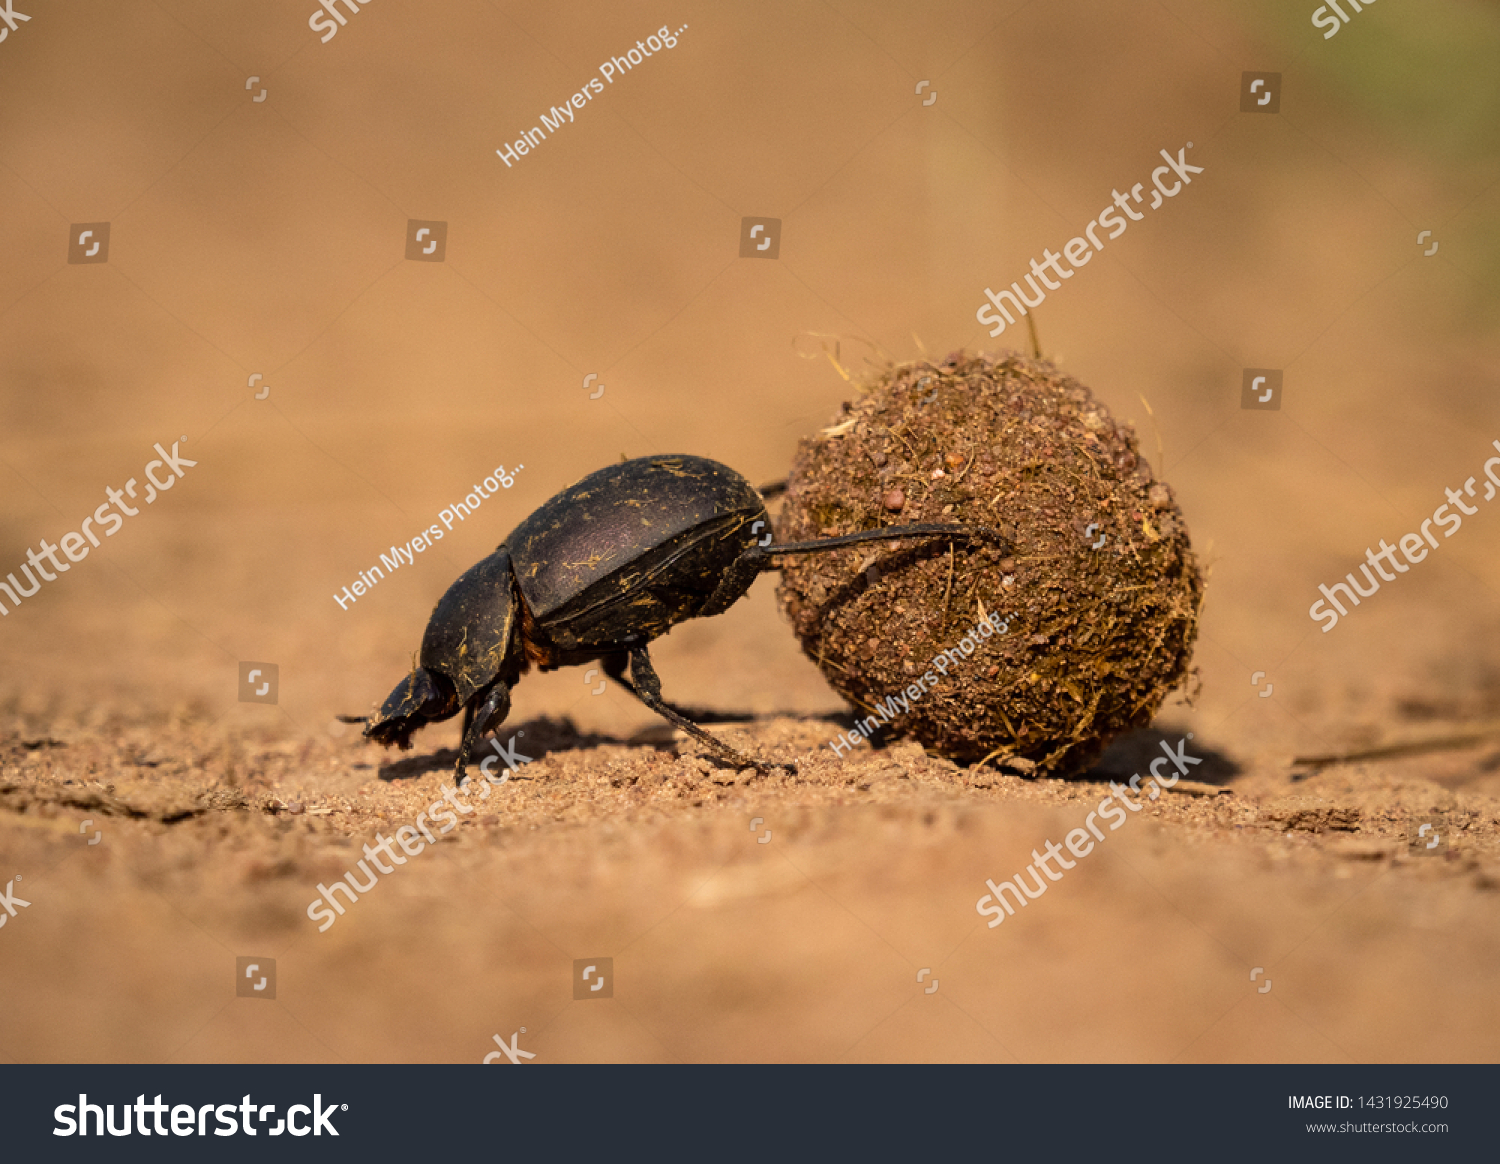 Dung beetle with a decent sized dung ball #1431925490